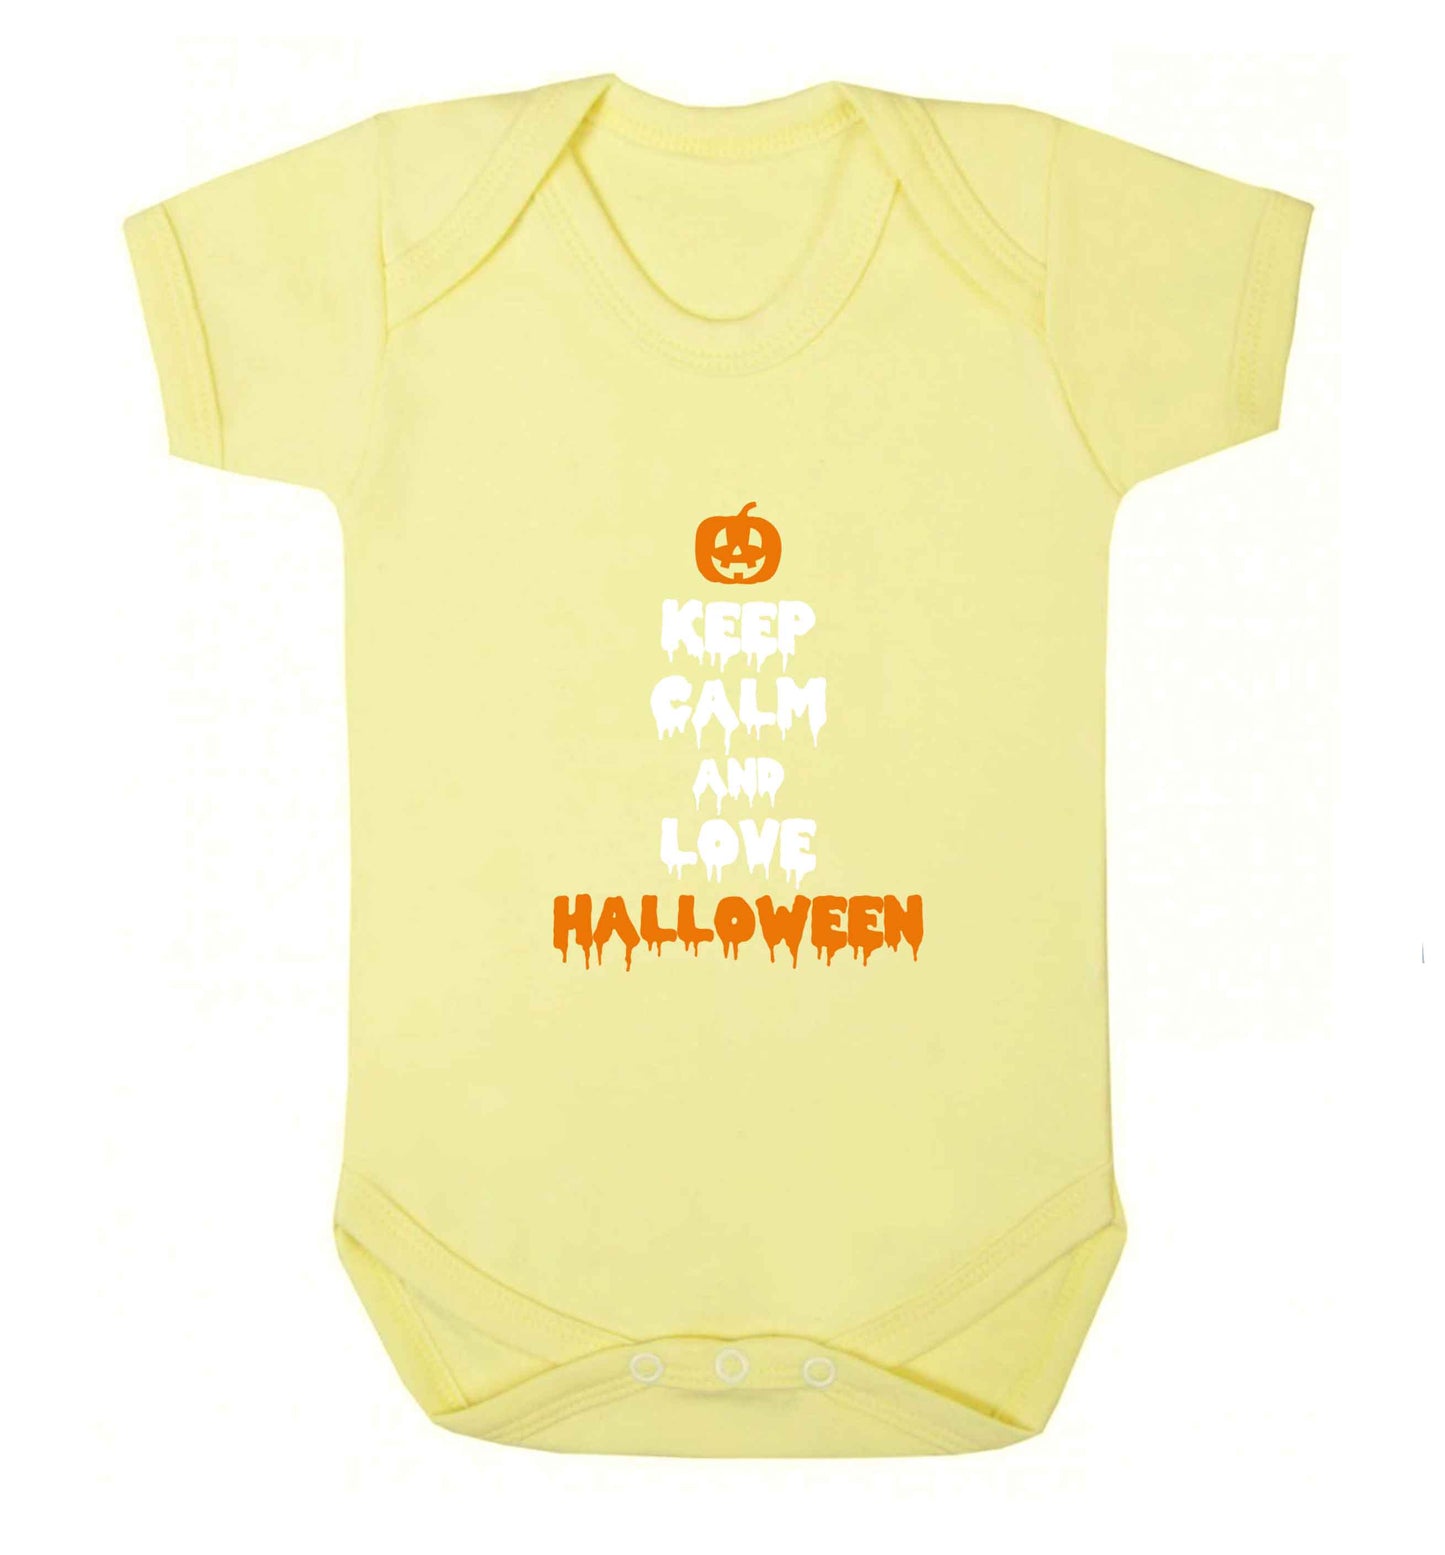 Keep calm and love halloween baby vest pale yellow 18-24 months